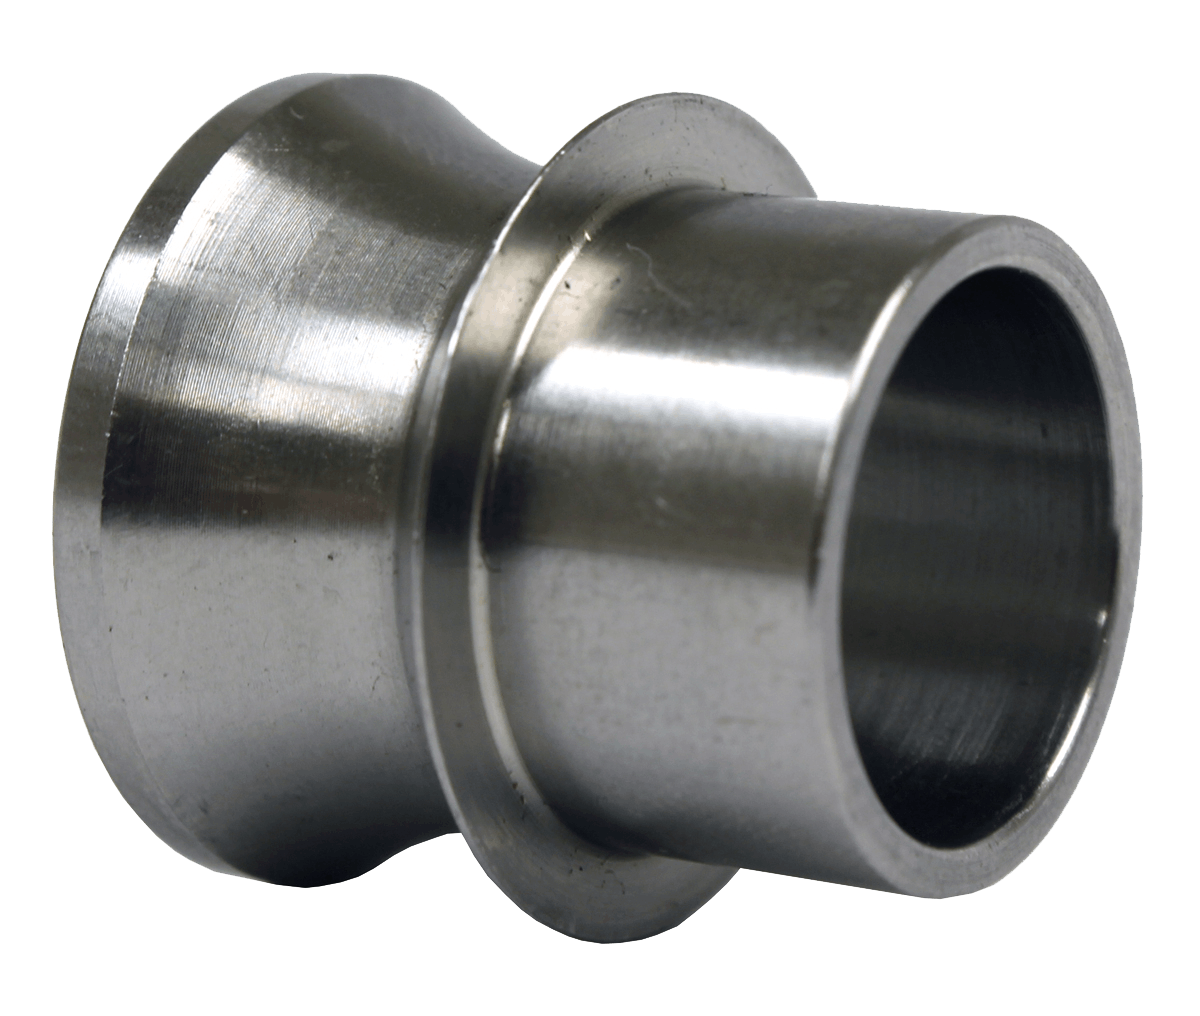 QA1 SN24-1221-H High Misalignment Spacer, 1.5 inch Od Ss, .75 inch X 4 inch Total Width